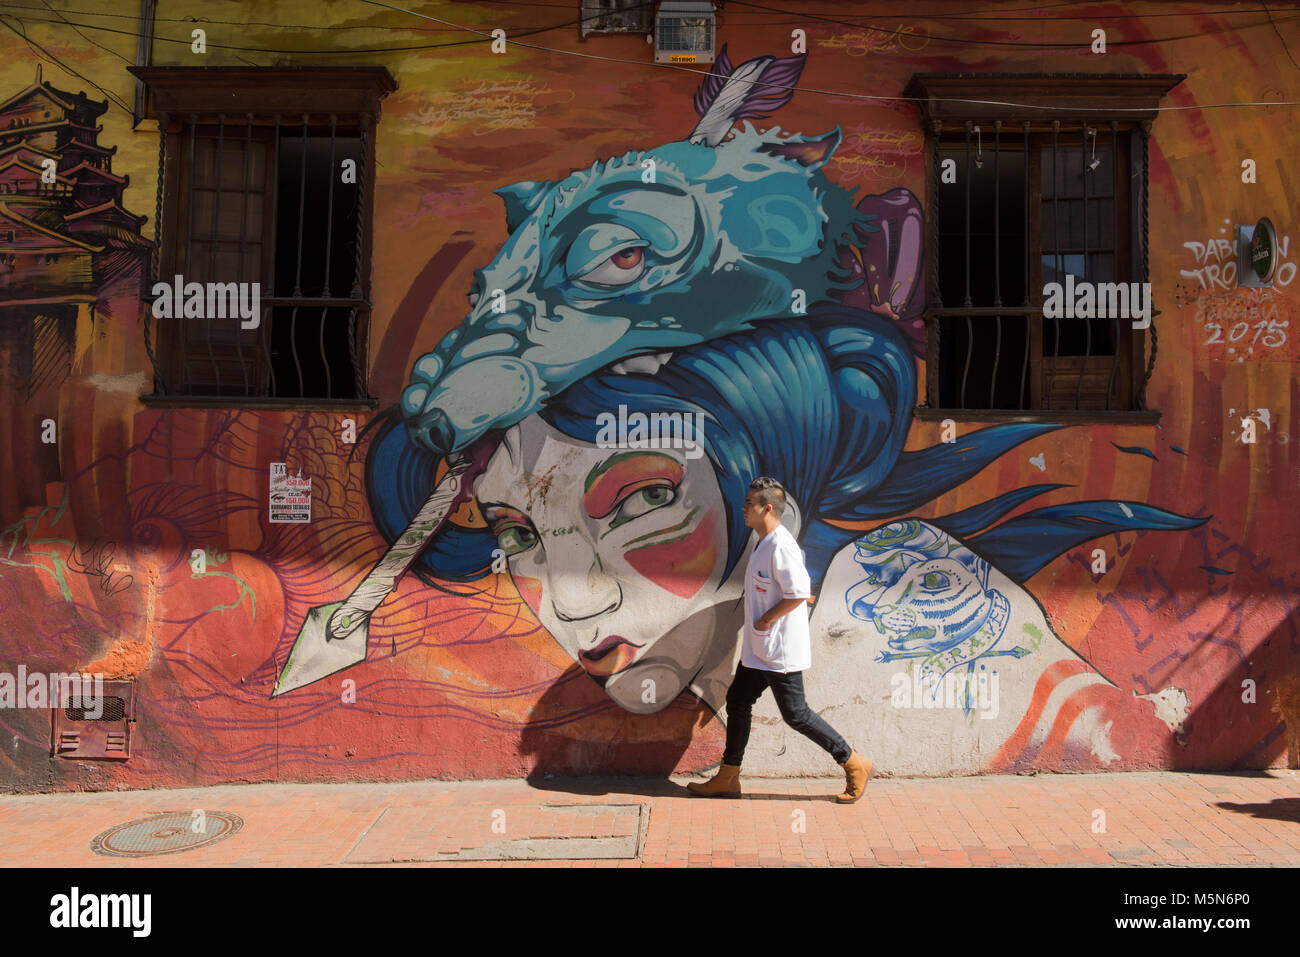 A man walking past a wall with graffiti in La Candelaria, Bogota, Colombia. Graffiti has been weaponised in Colombia's capital city. Stock Photo